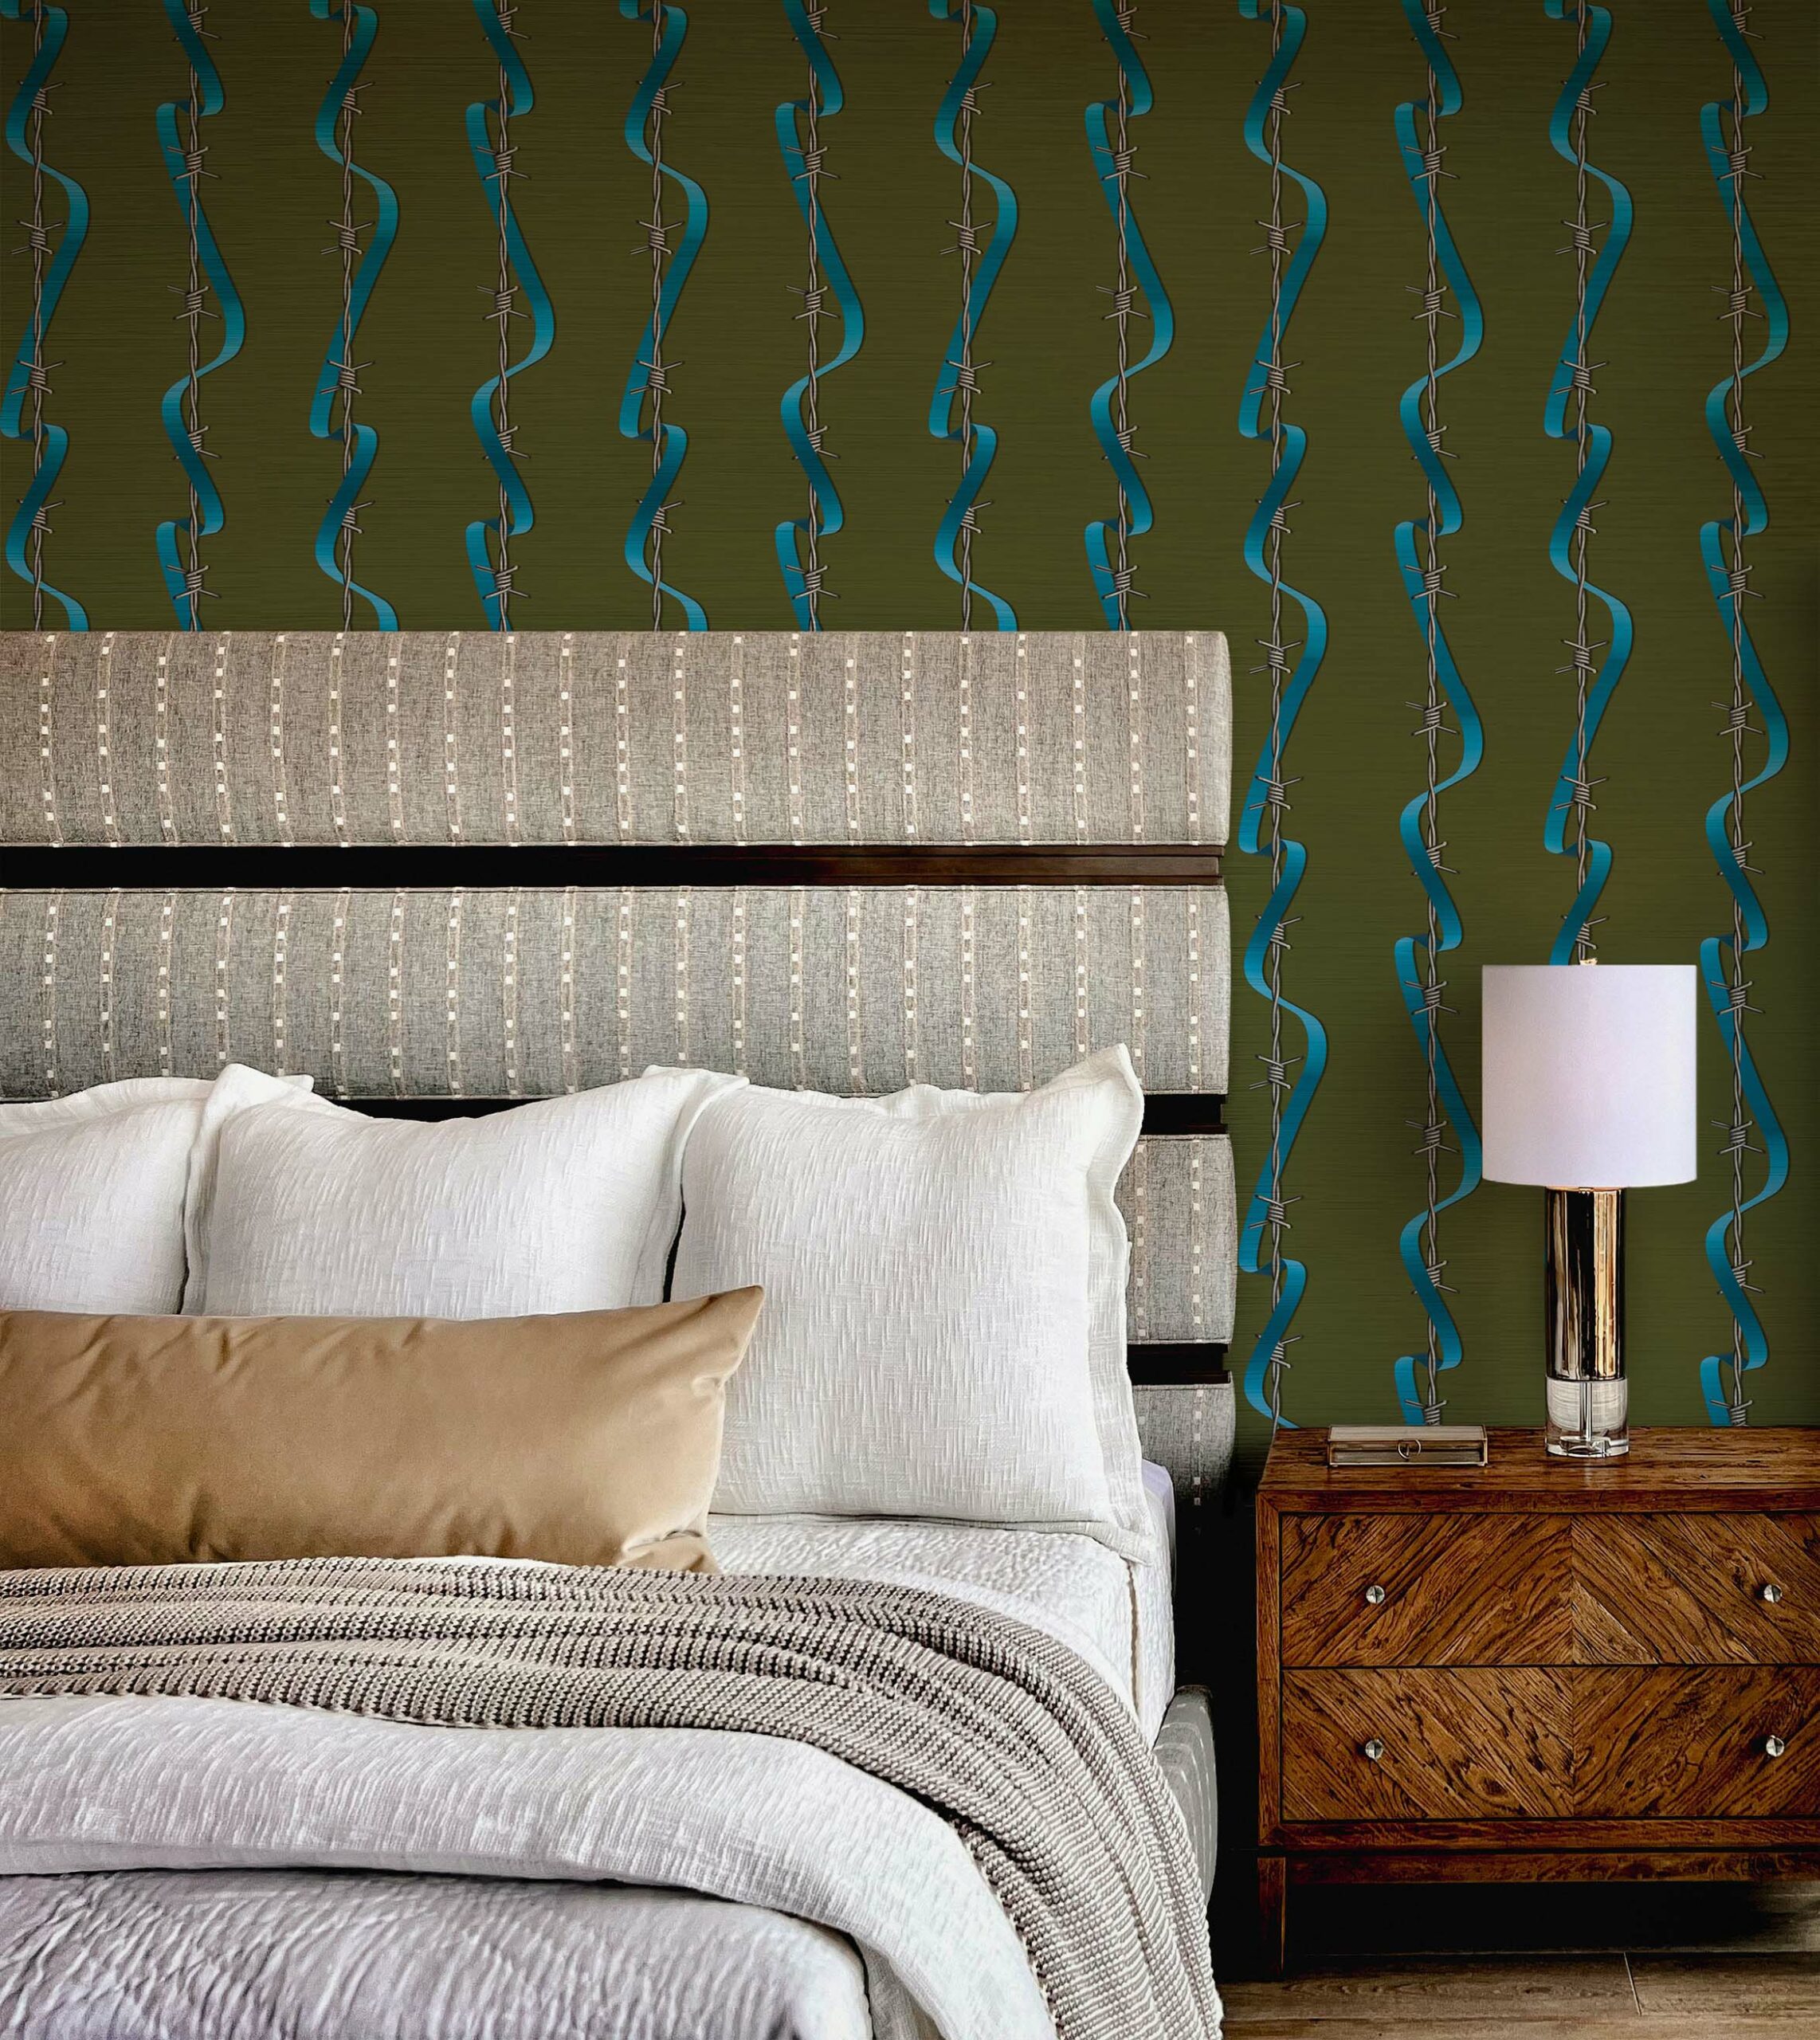 True-Love-Isnt-Hearts-and-Flowers-MaVoix-wallpaper-by-Magnus-Gjoen-pattern-Collezione-Racconti-Bedroom